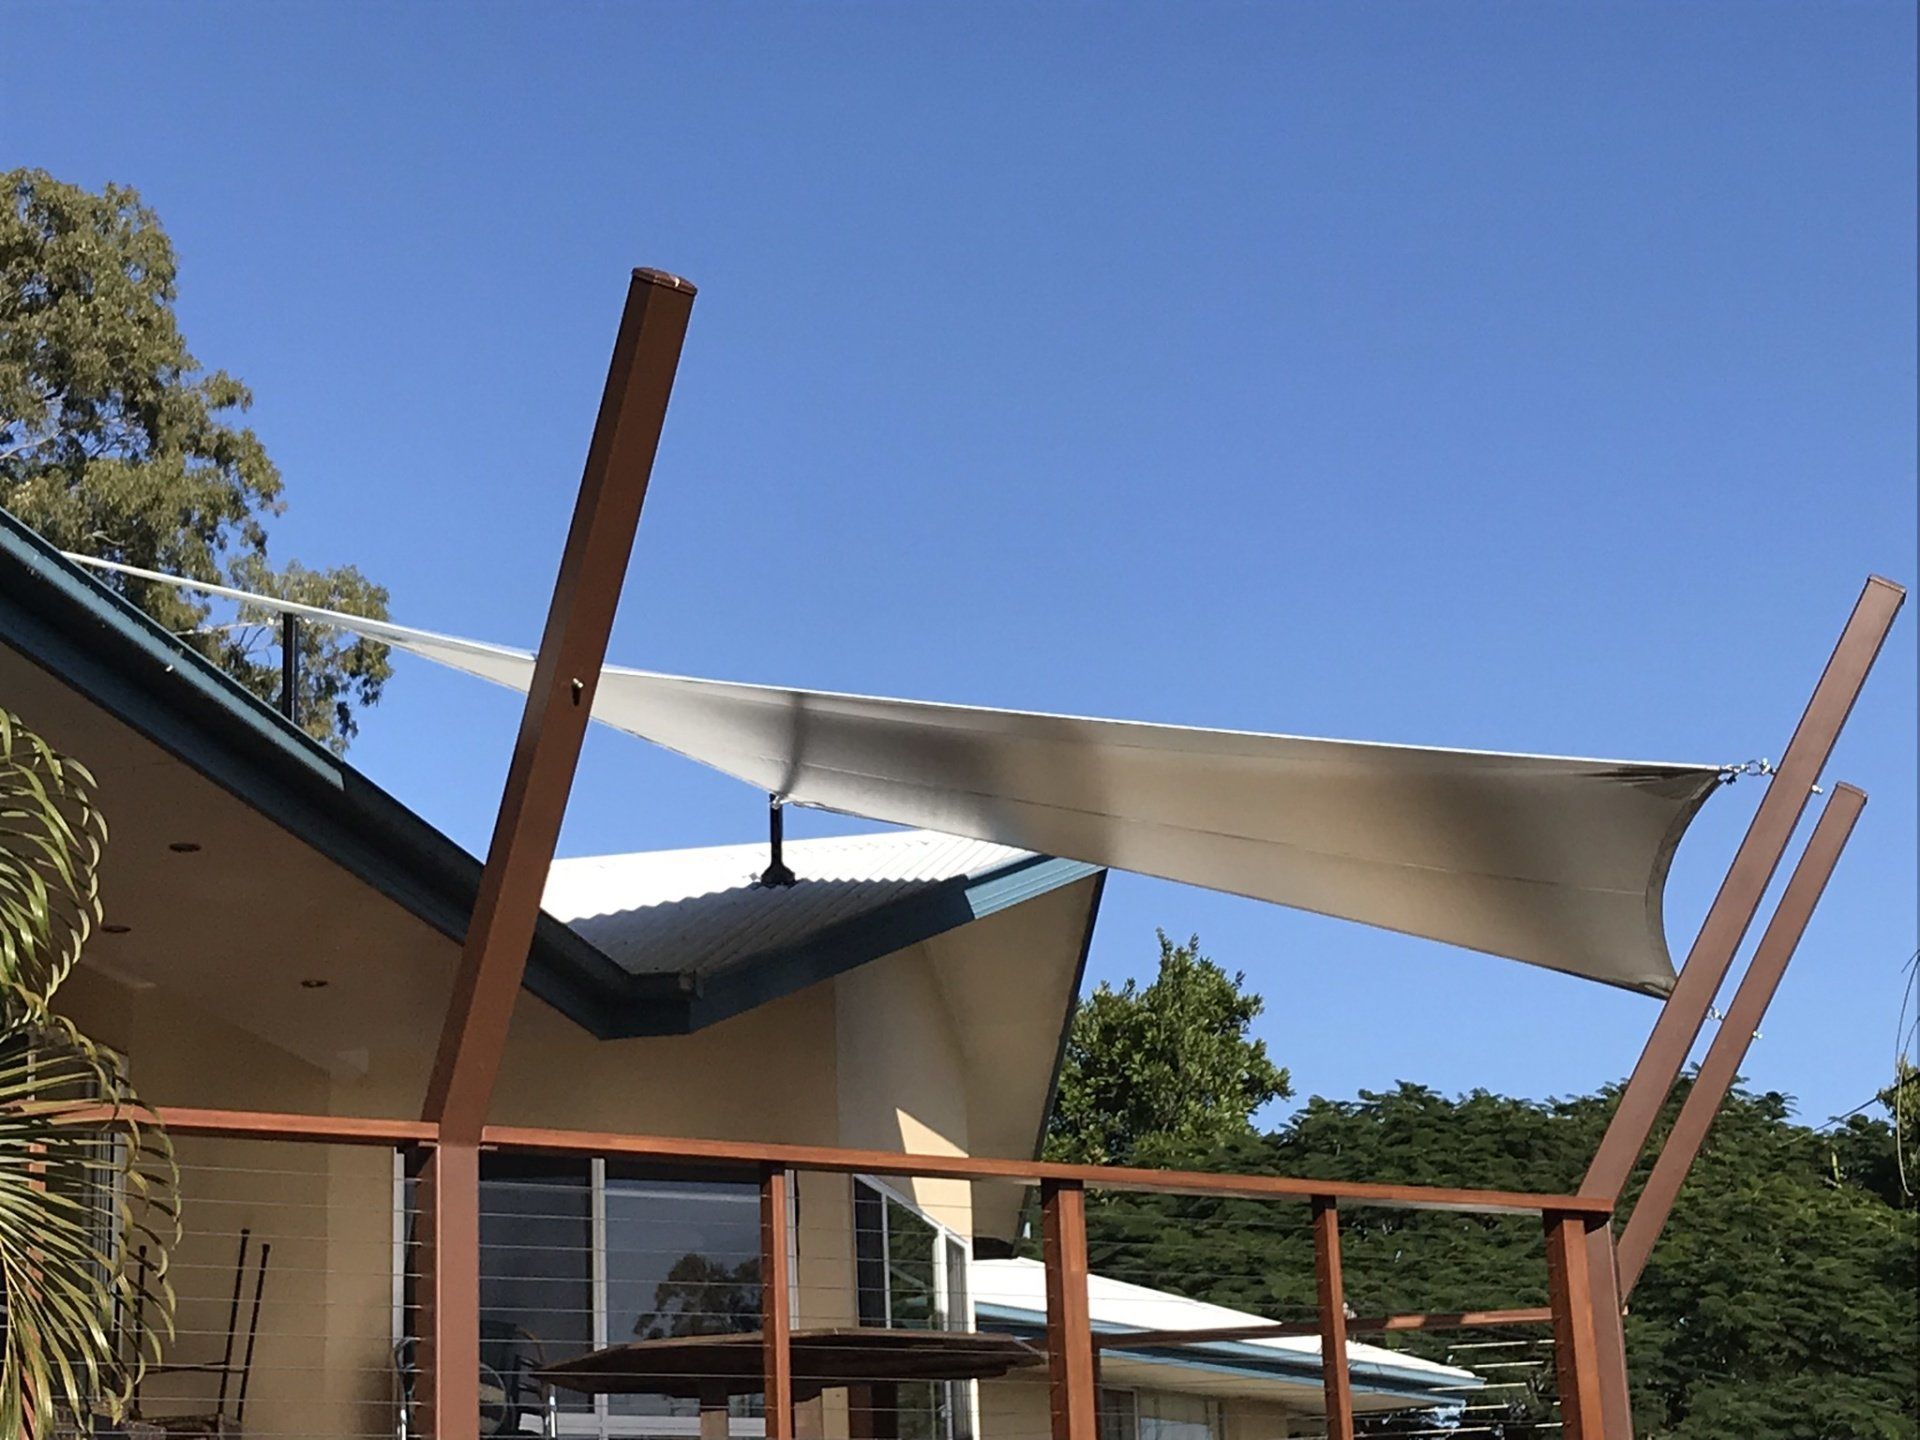 White Vinyl Shade Sail — Shade Sail Installations in Tweed Heads, NSW